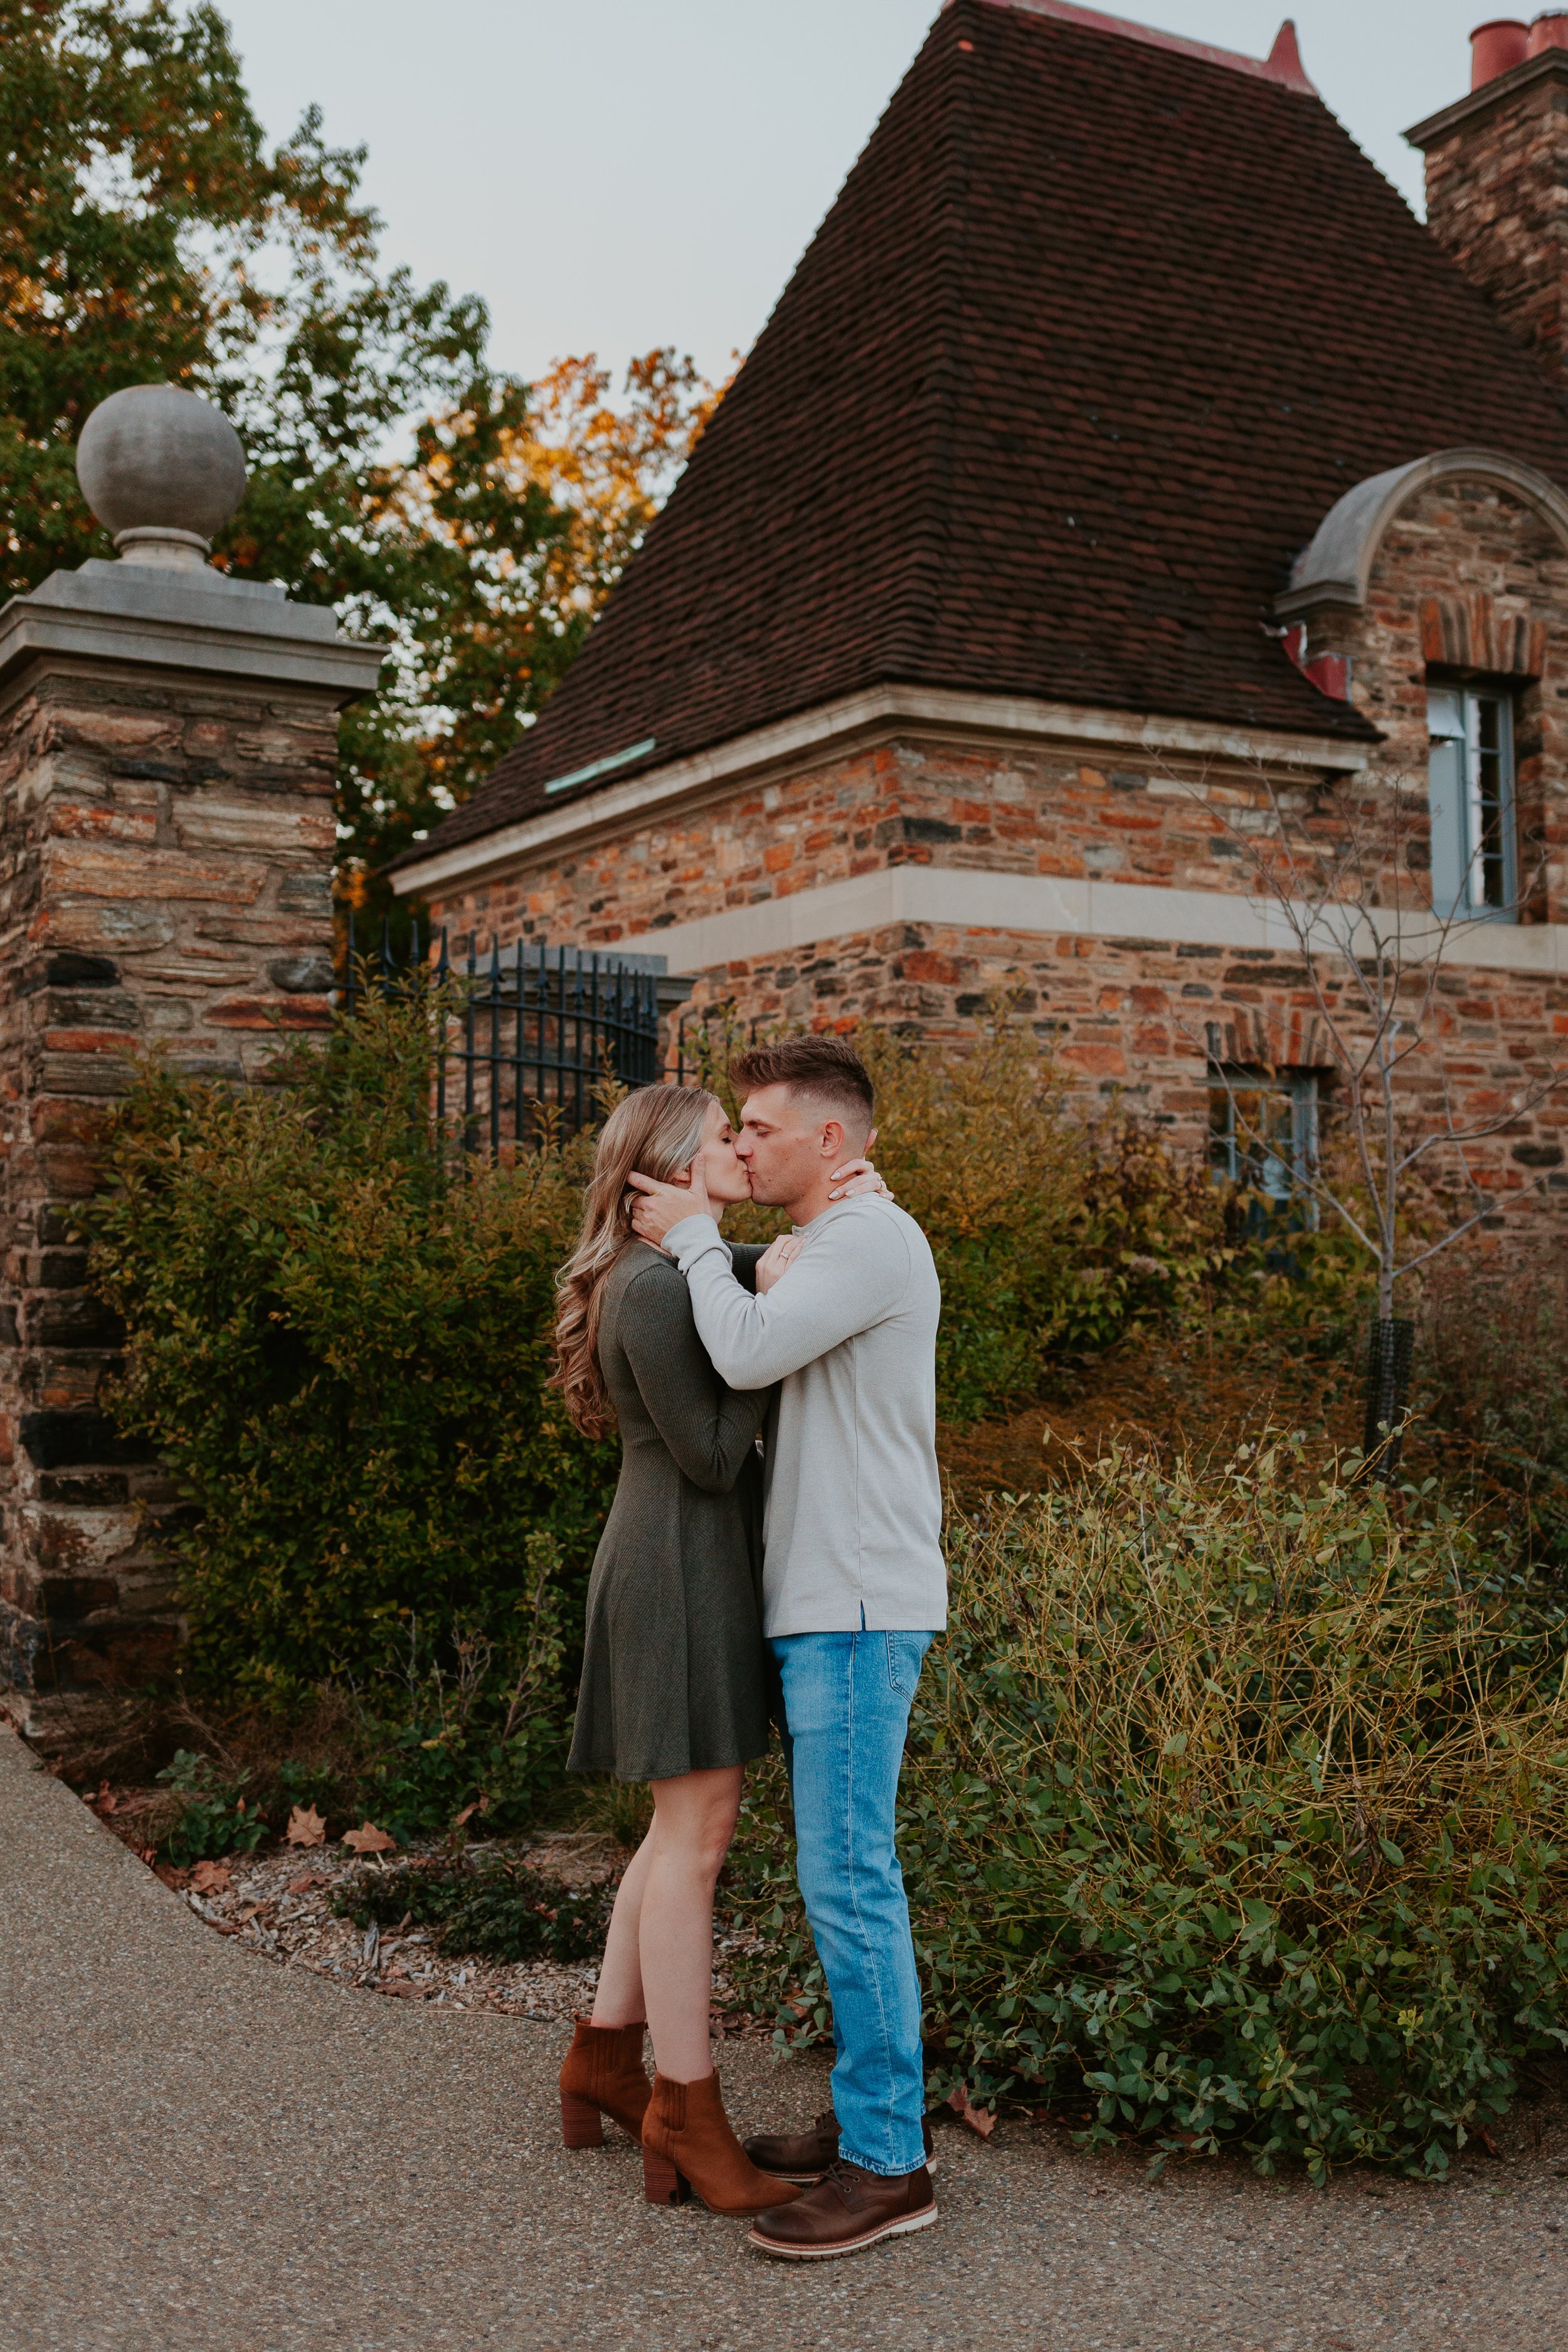 Couple kisses in front of brick building.